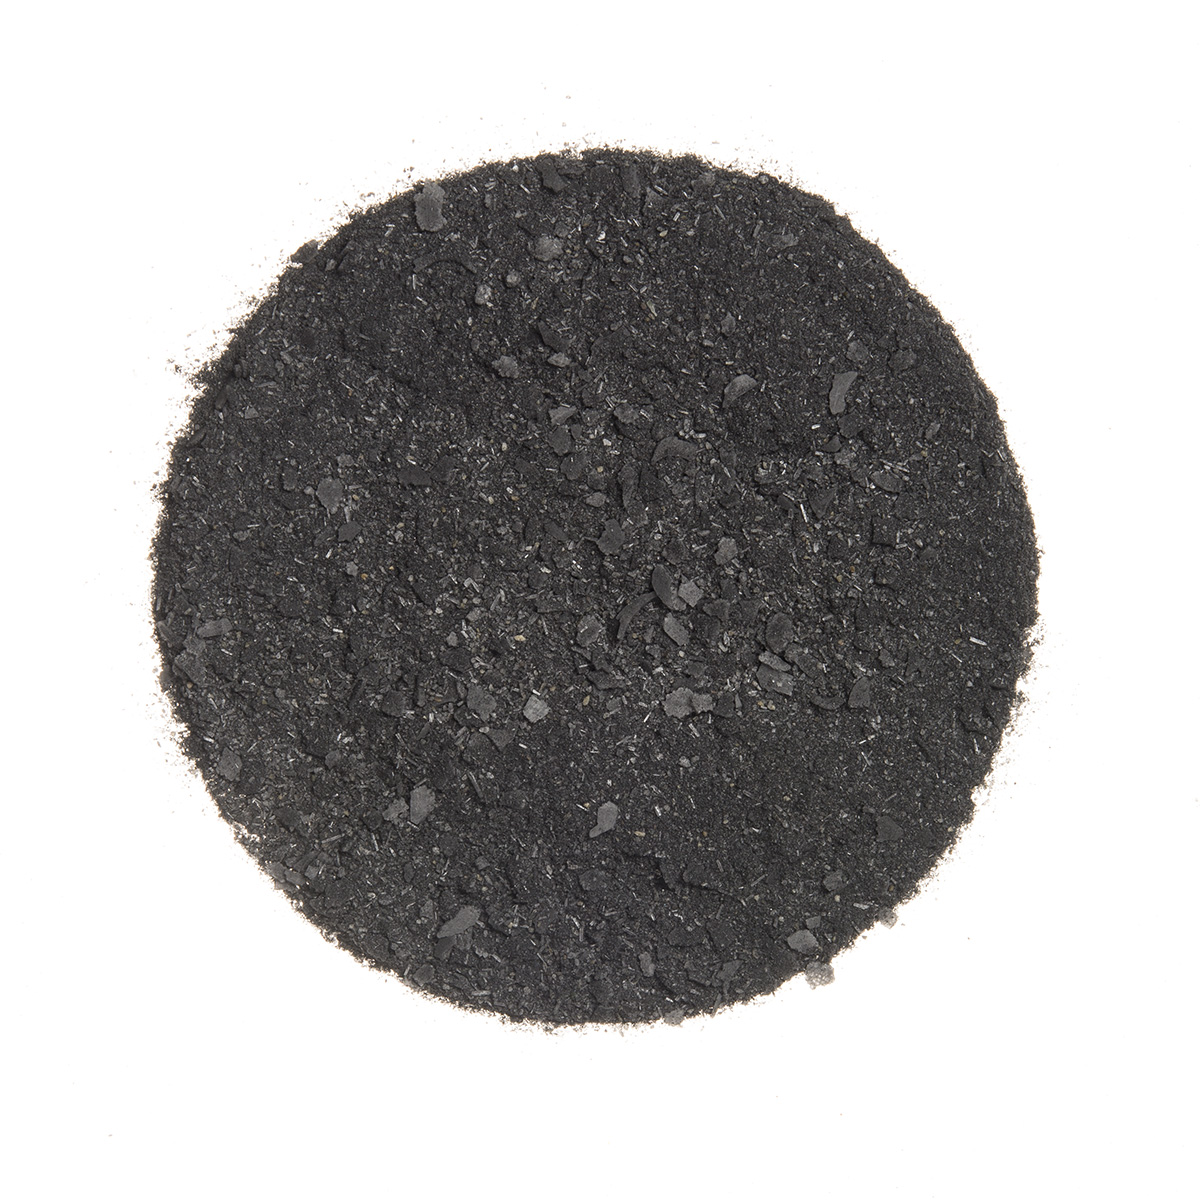 Activated Charcoal Powder, 5 oz at Whole Foods Market